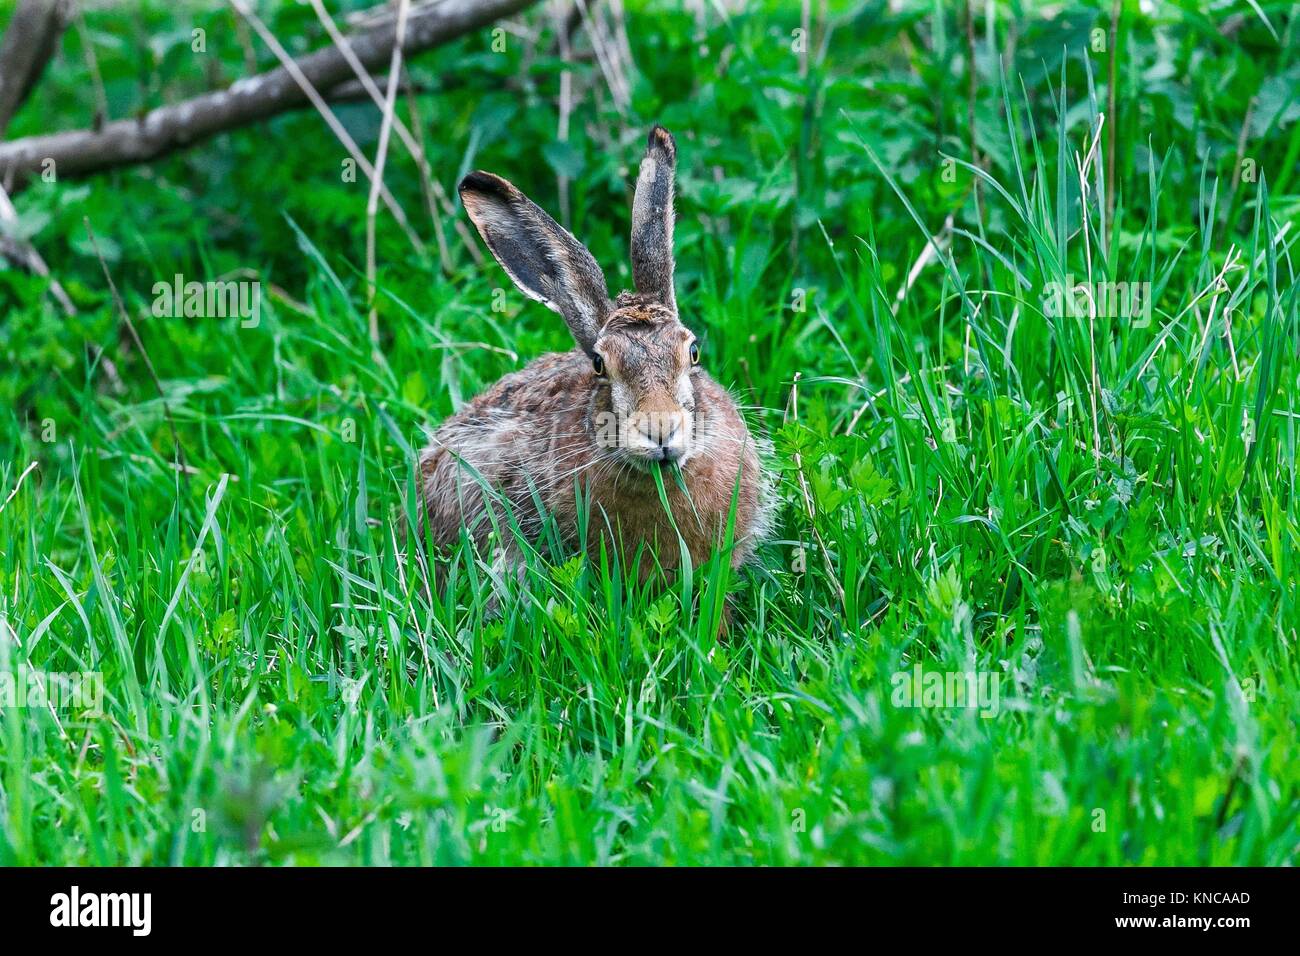 European Hare Feeding on Grass in a Spring Day. Stock Photo